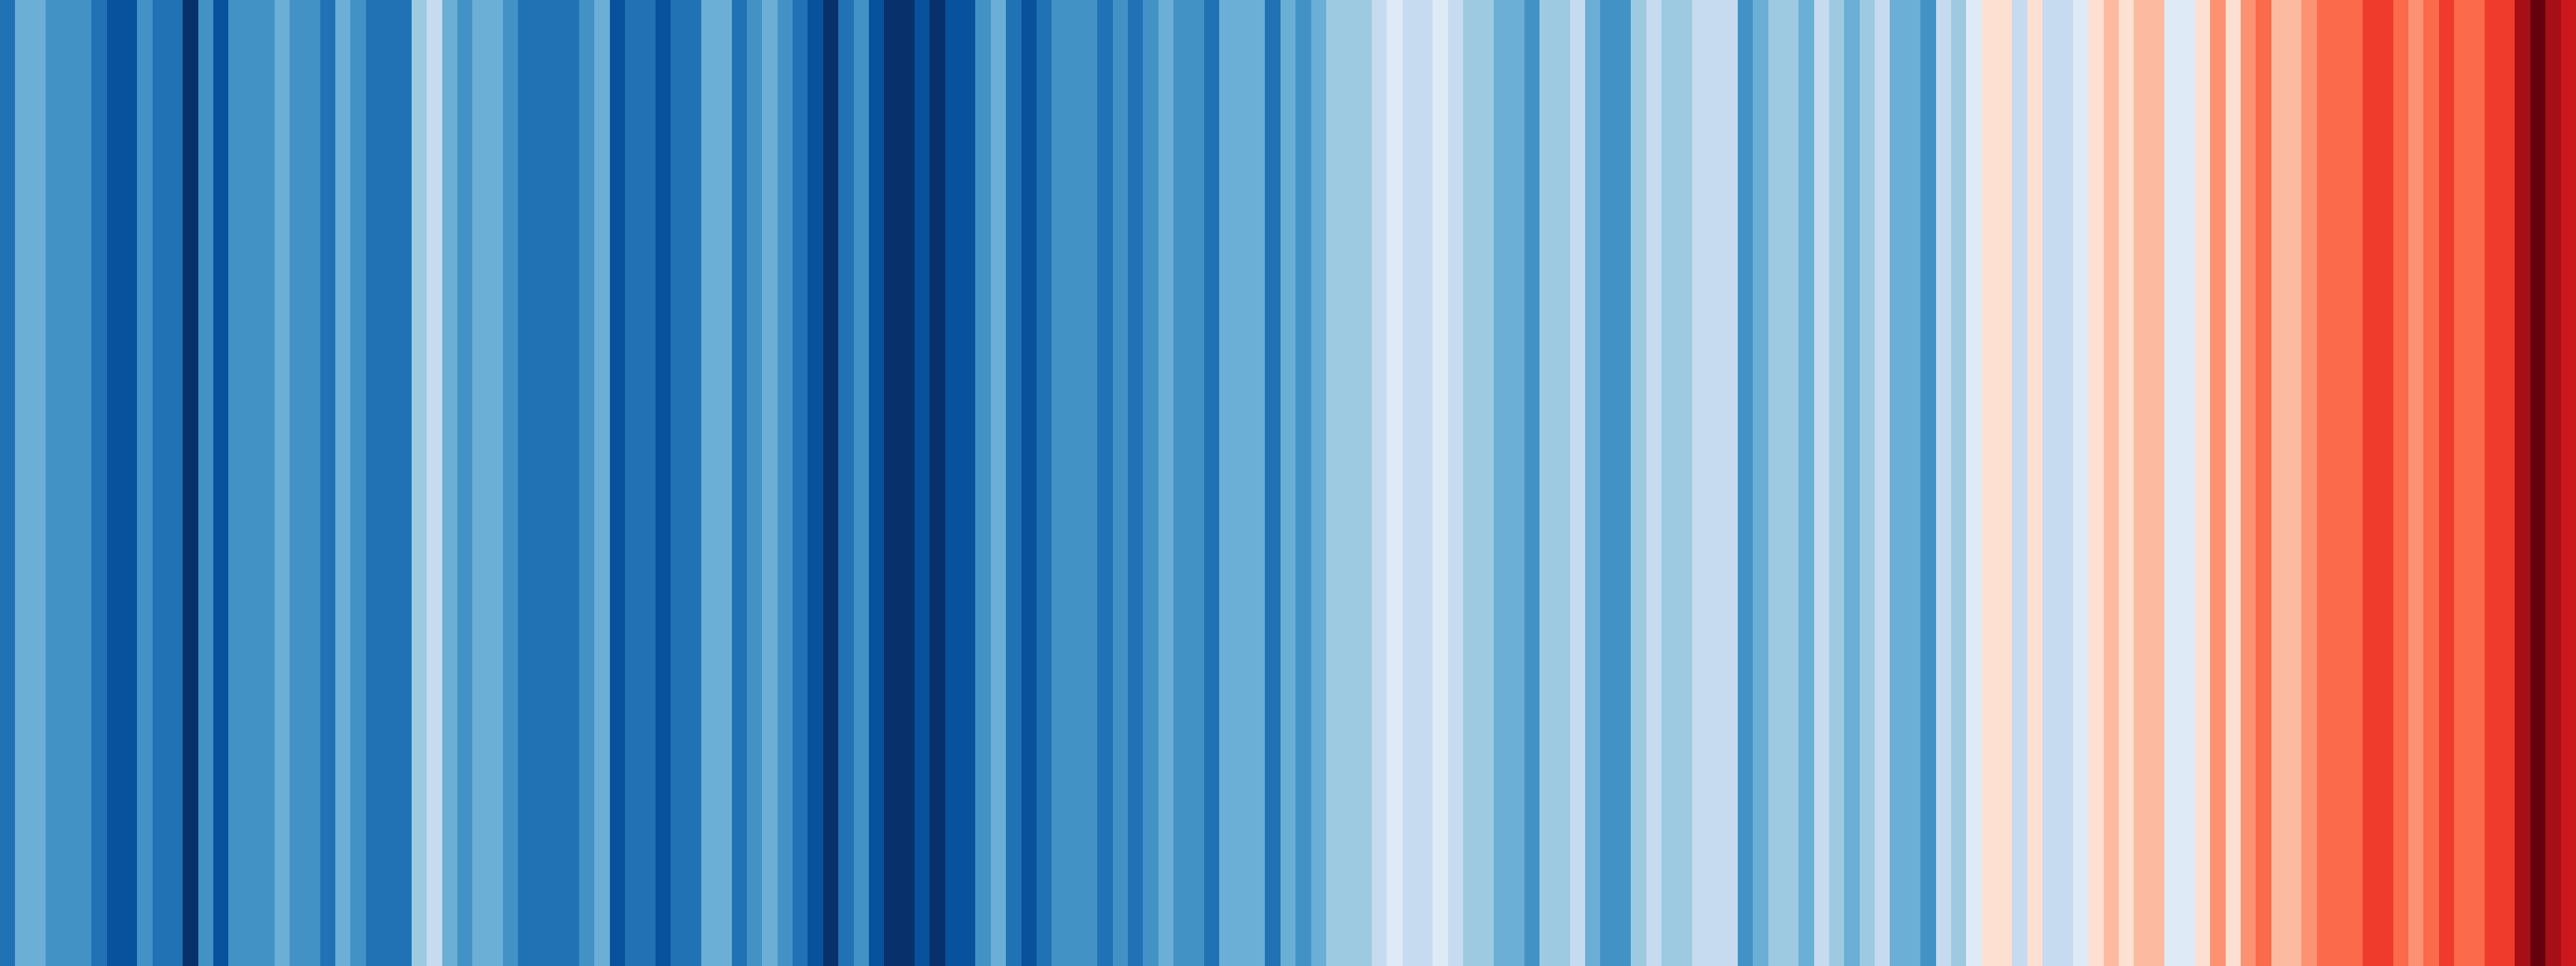 The Warming Stripes